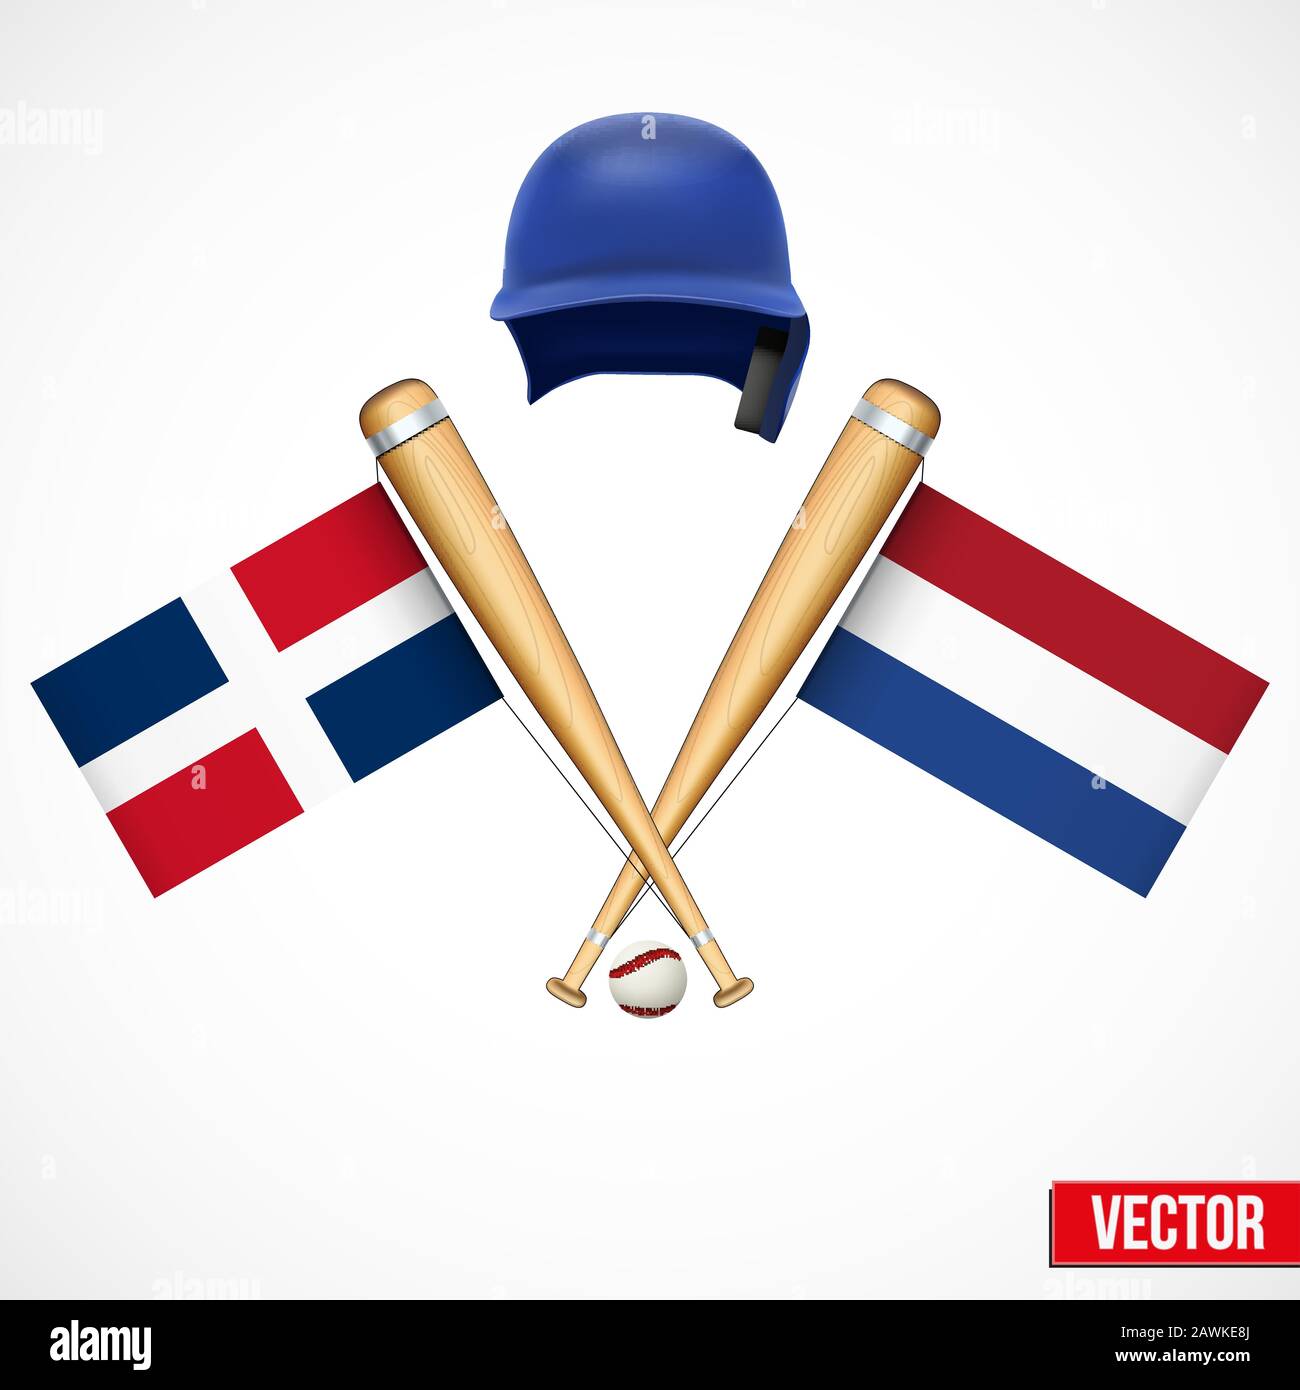 Symbols of Baseball team Dominican Republic and Netherlands. Stock Vector